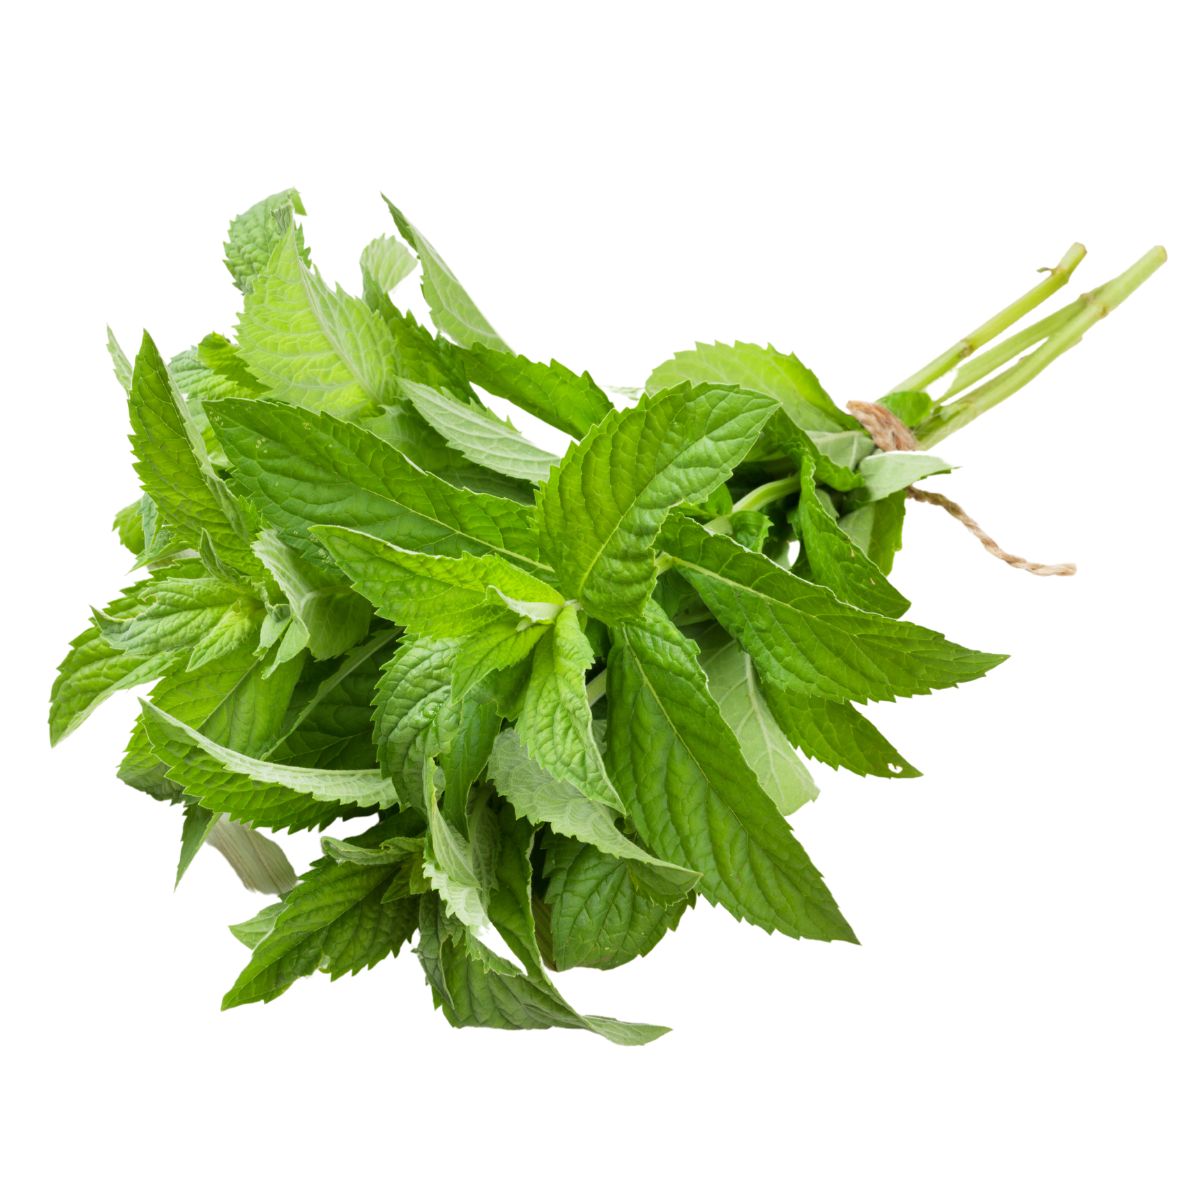 Mint leaves bunch tied with thread